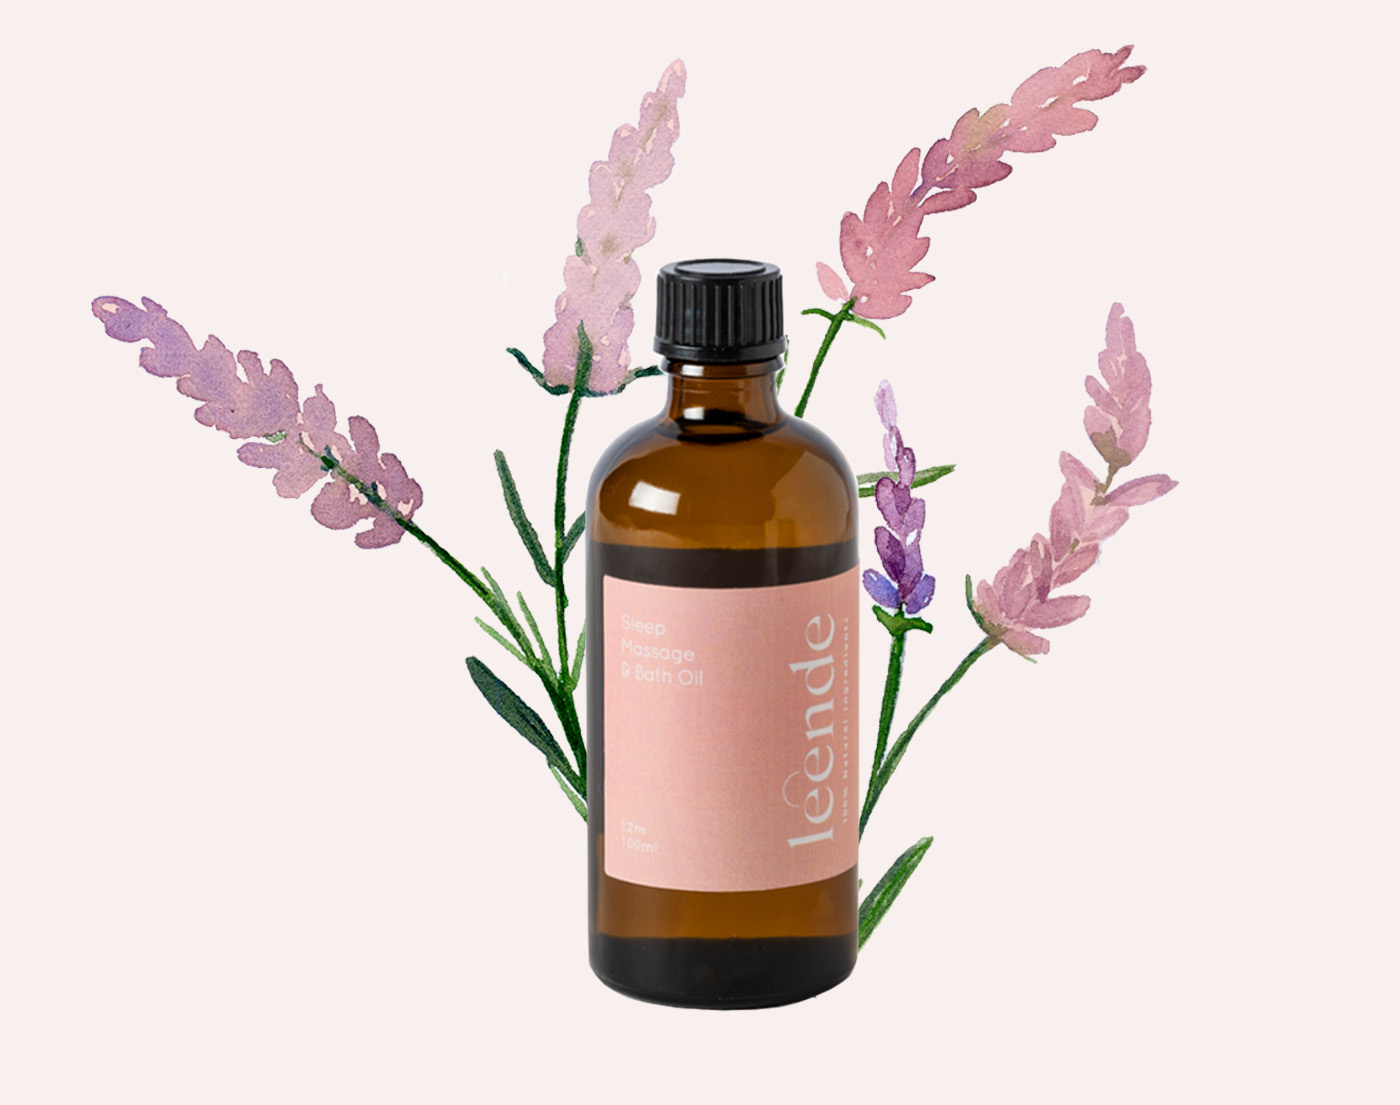 100% Natural Massage and Sleep Oil with Lavender decoration in pinks and purples